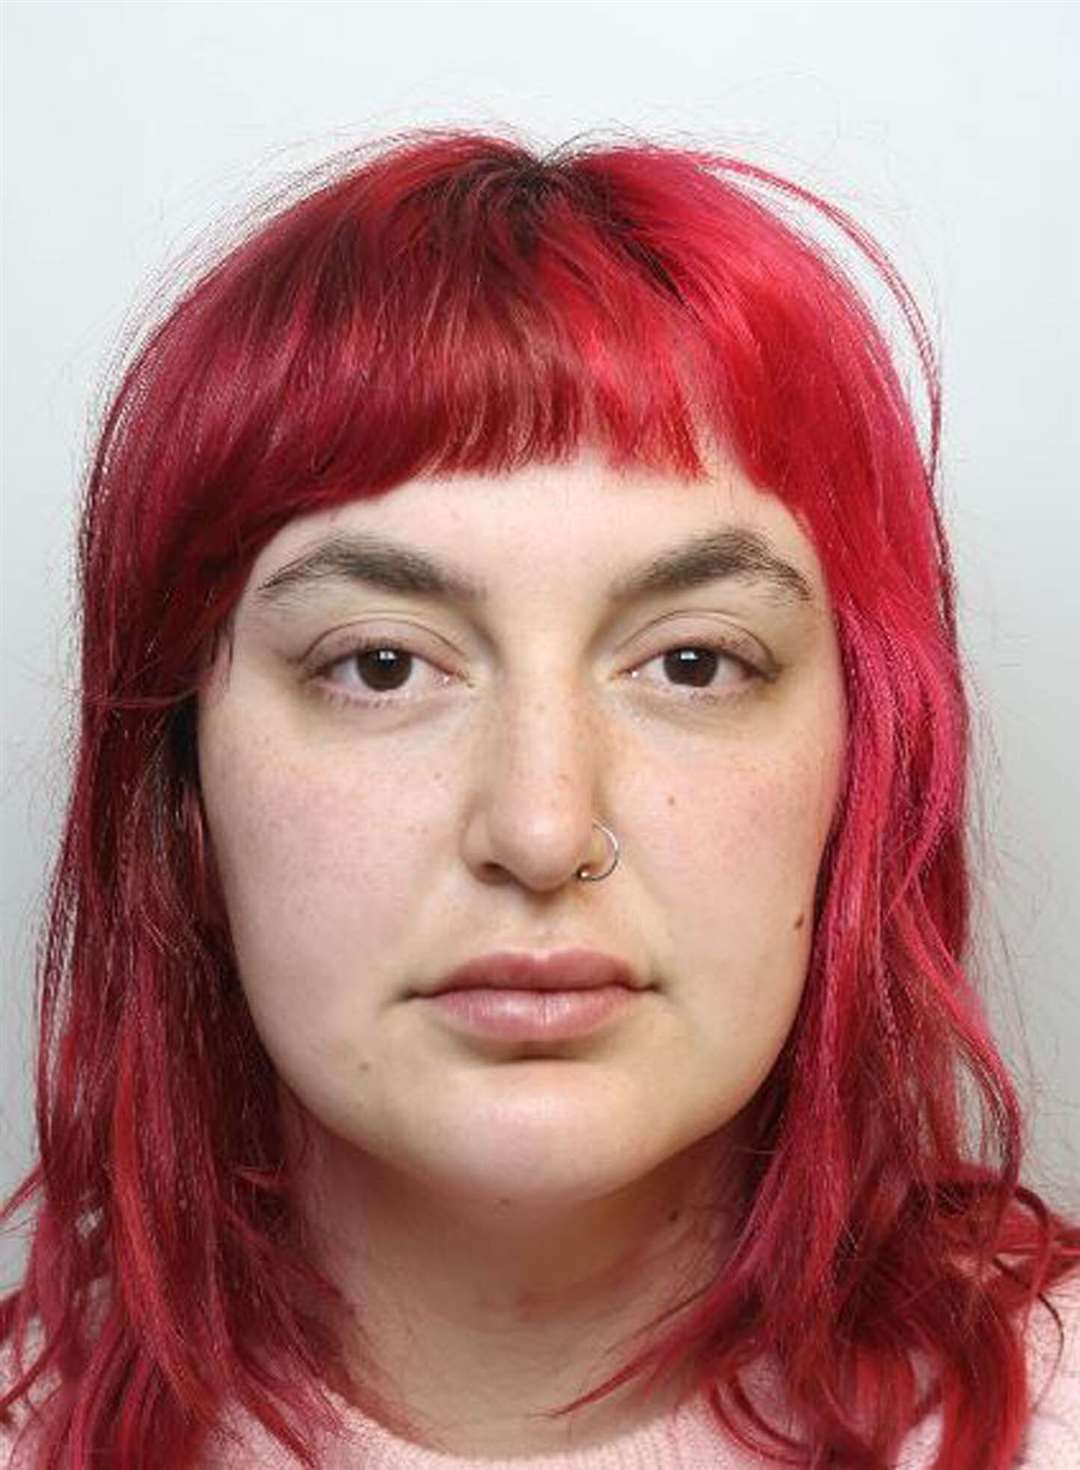 Jasmine York was jailed after being convicted of arson (Avon and Somerset Police/PA)